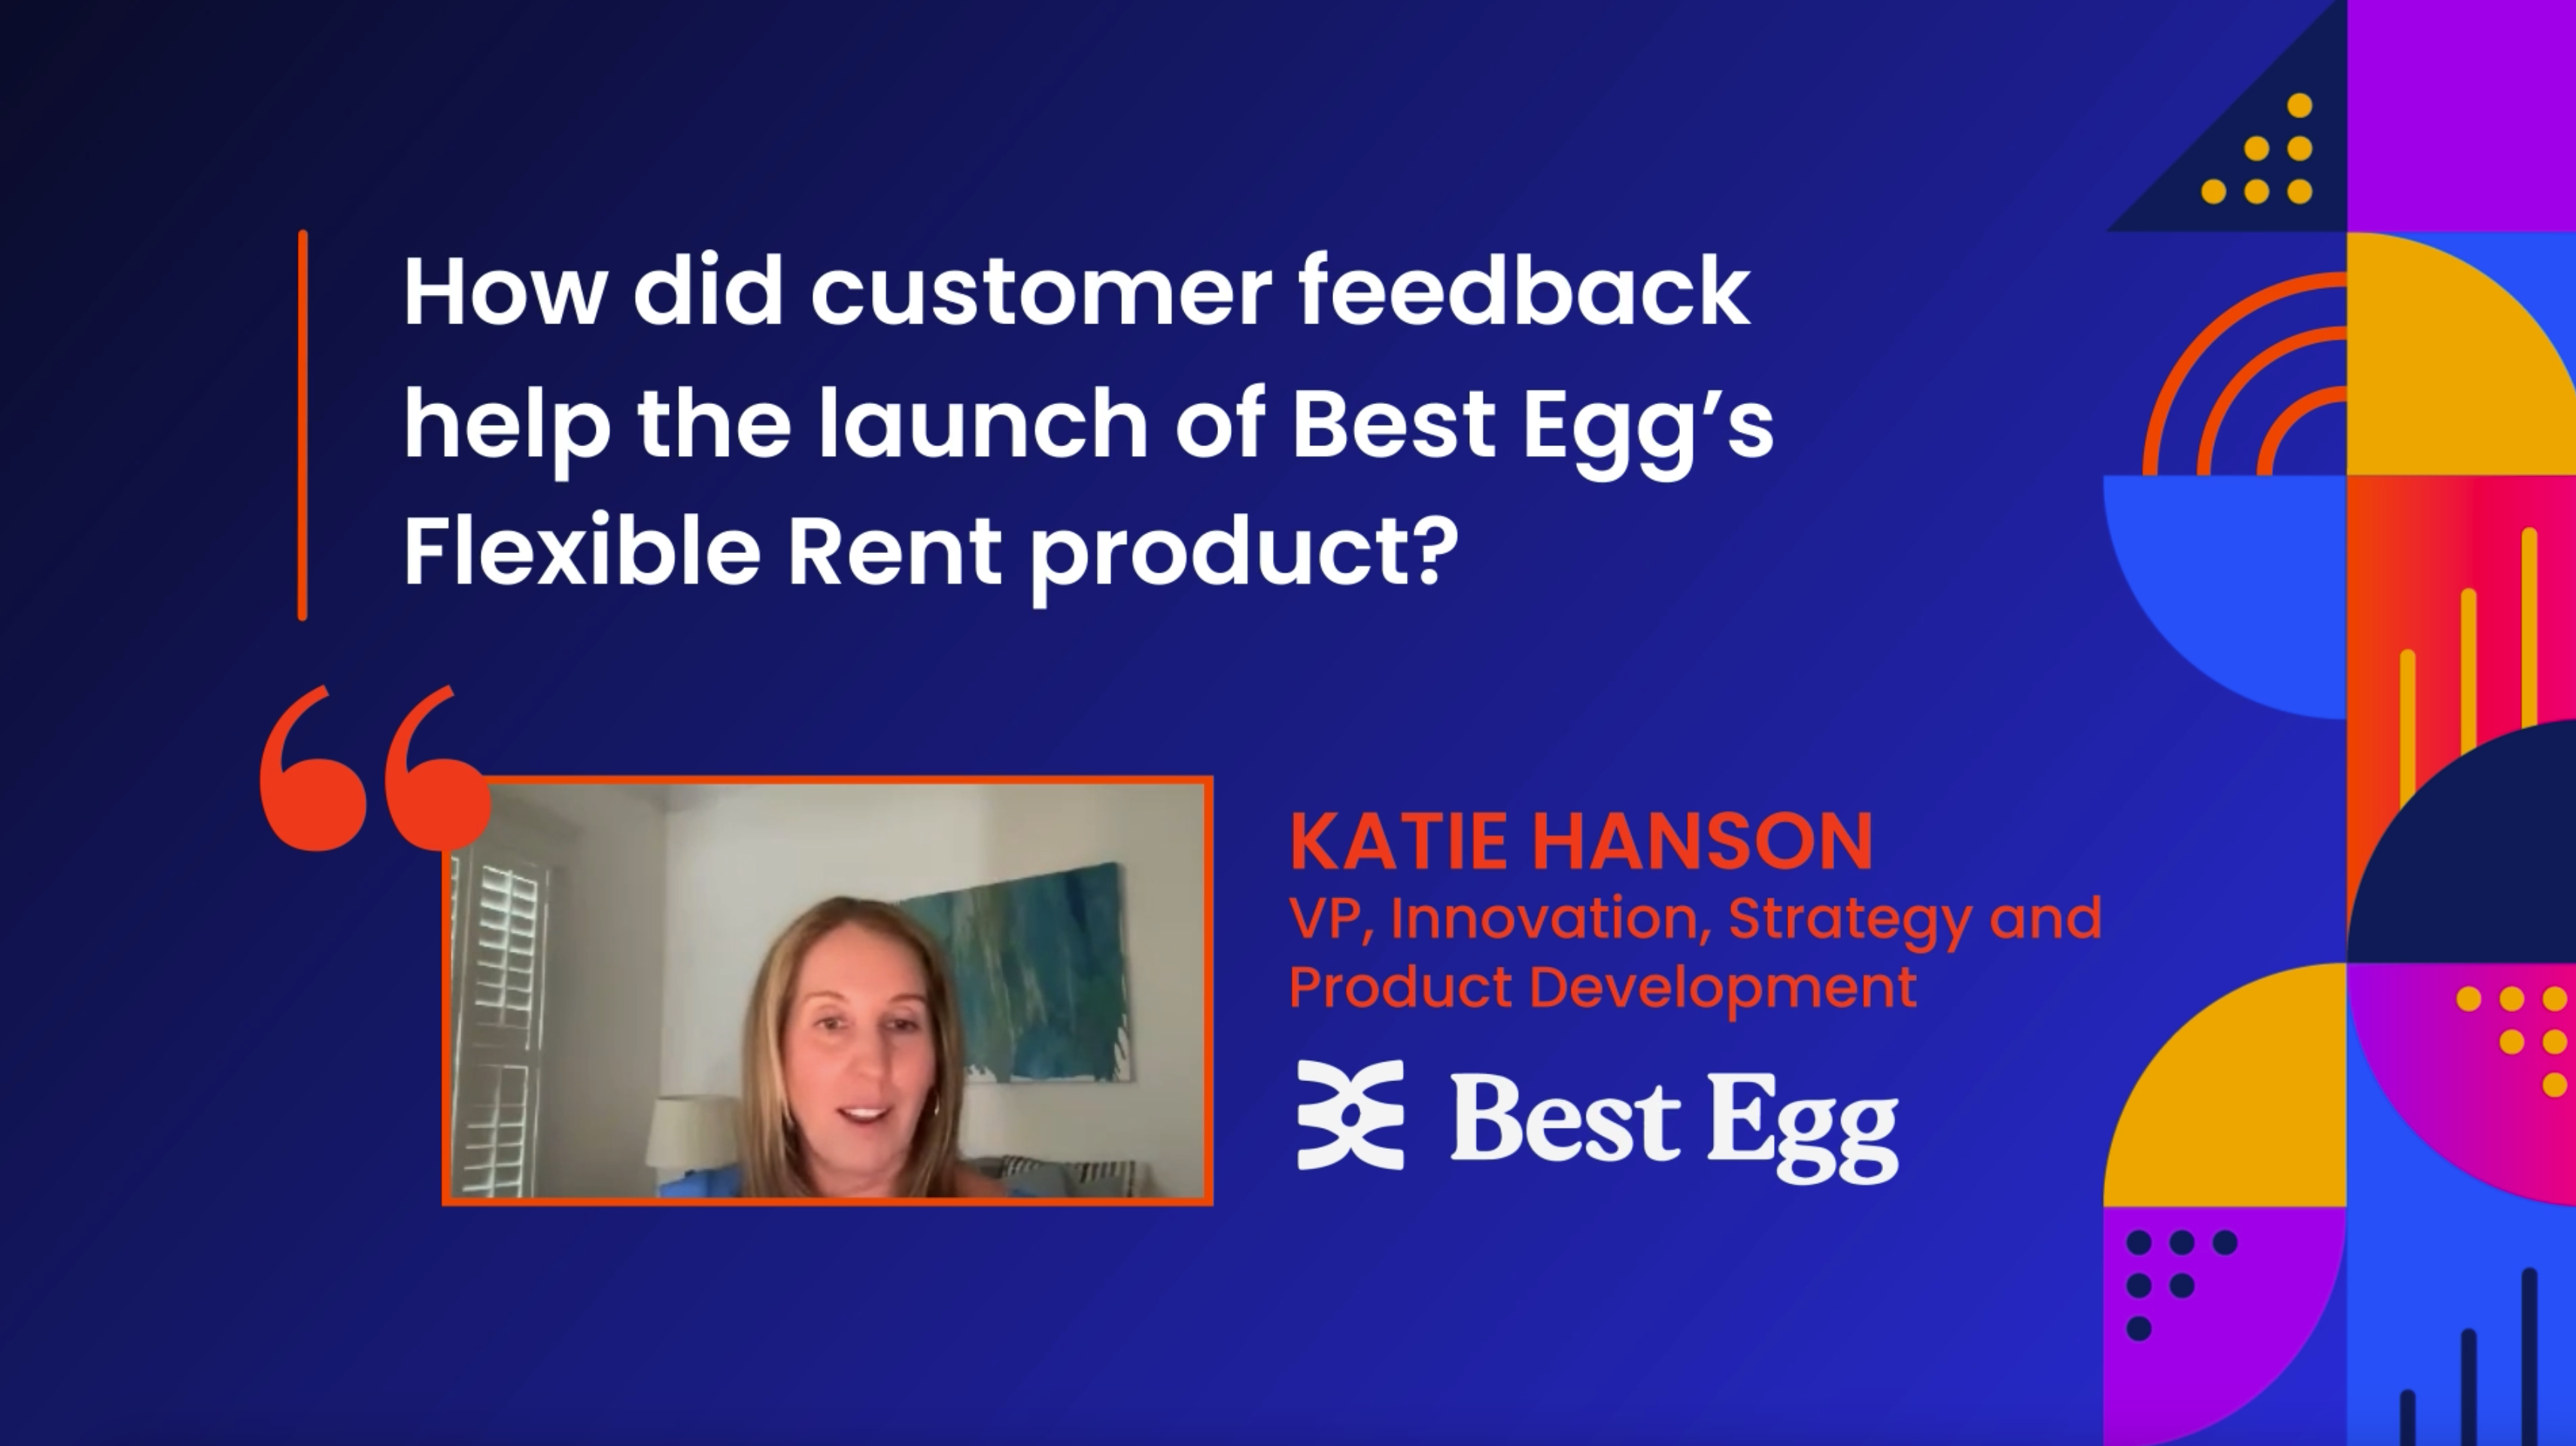 Image of a still from the Best Egg client video with Katie Hanson.